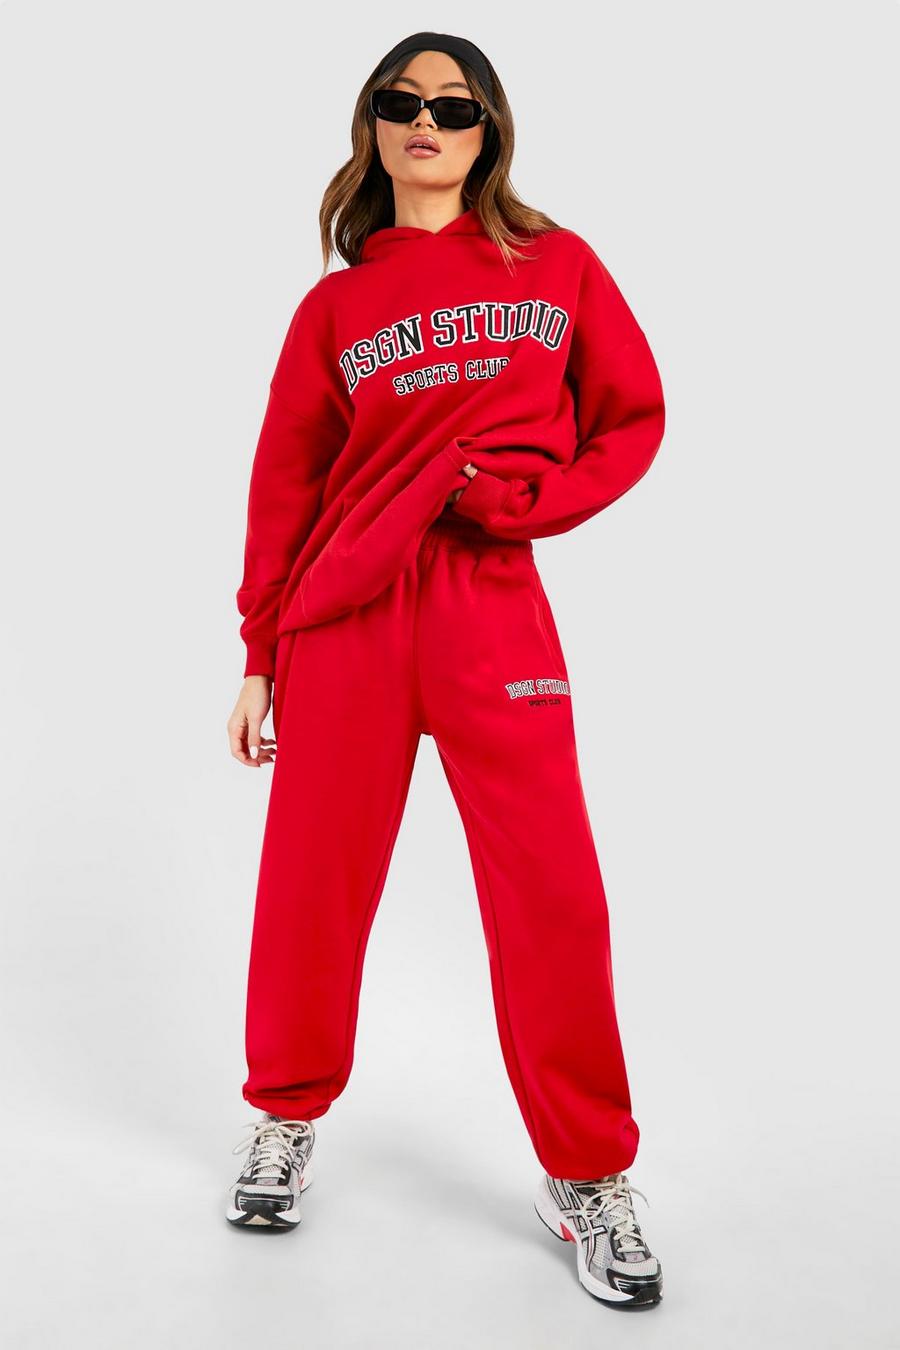 Red Dsgn Studio Applique Oversized Cuffed Track Pants